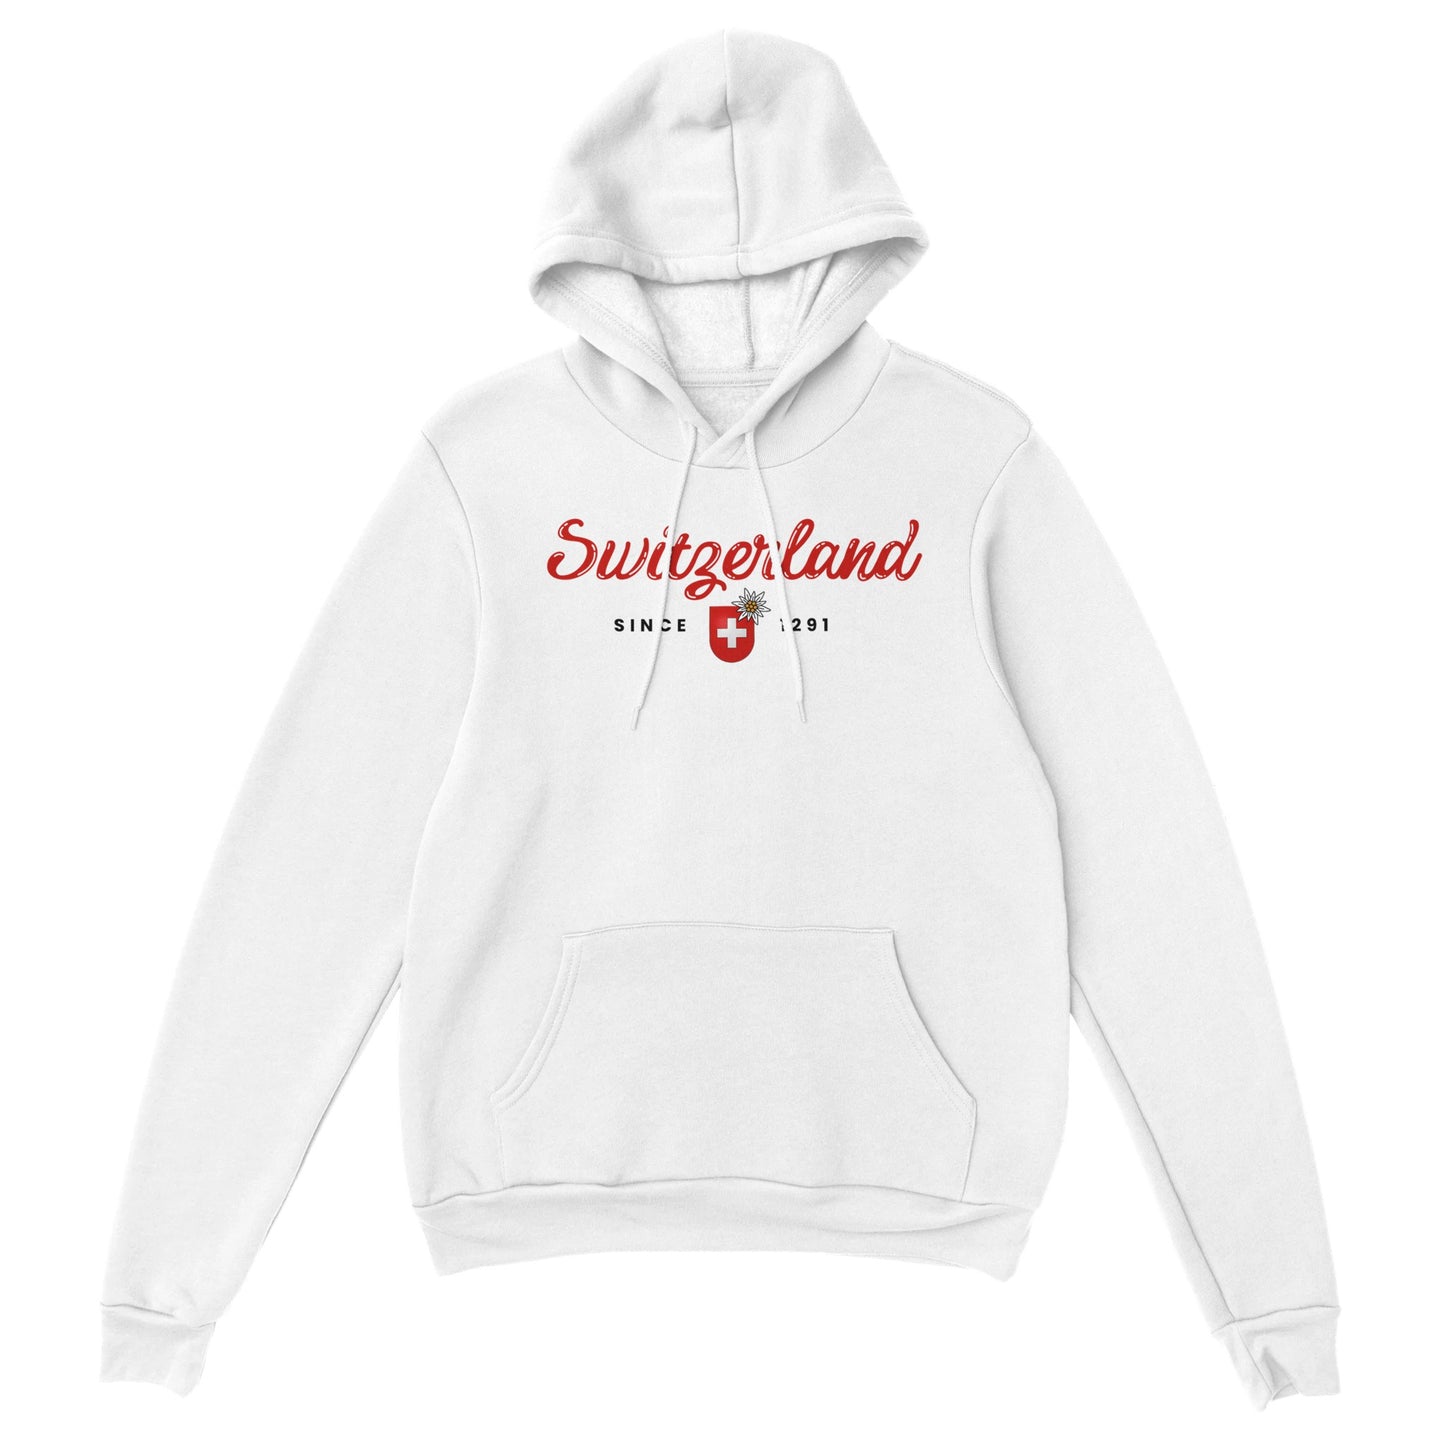 Switzerland Since 1291 | Unisex Hoodie: Embrace Swiss Heritage with Coat of Arms & Edelweiss Design